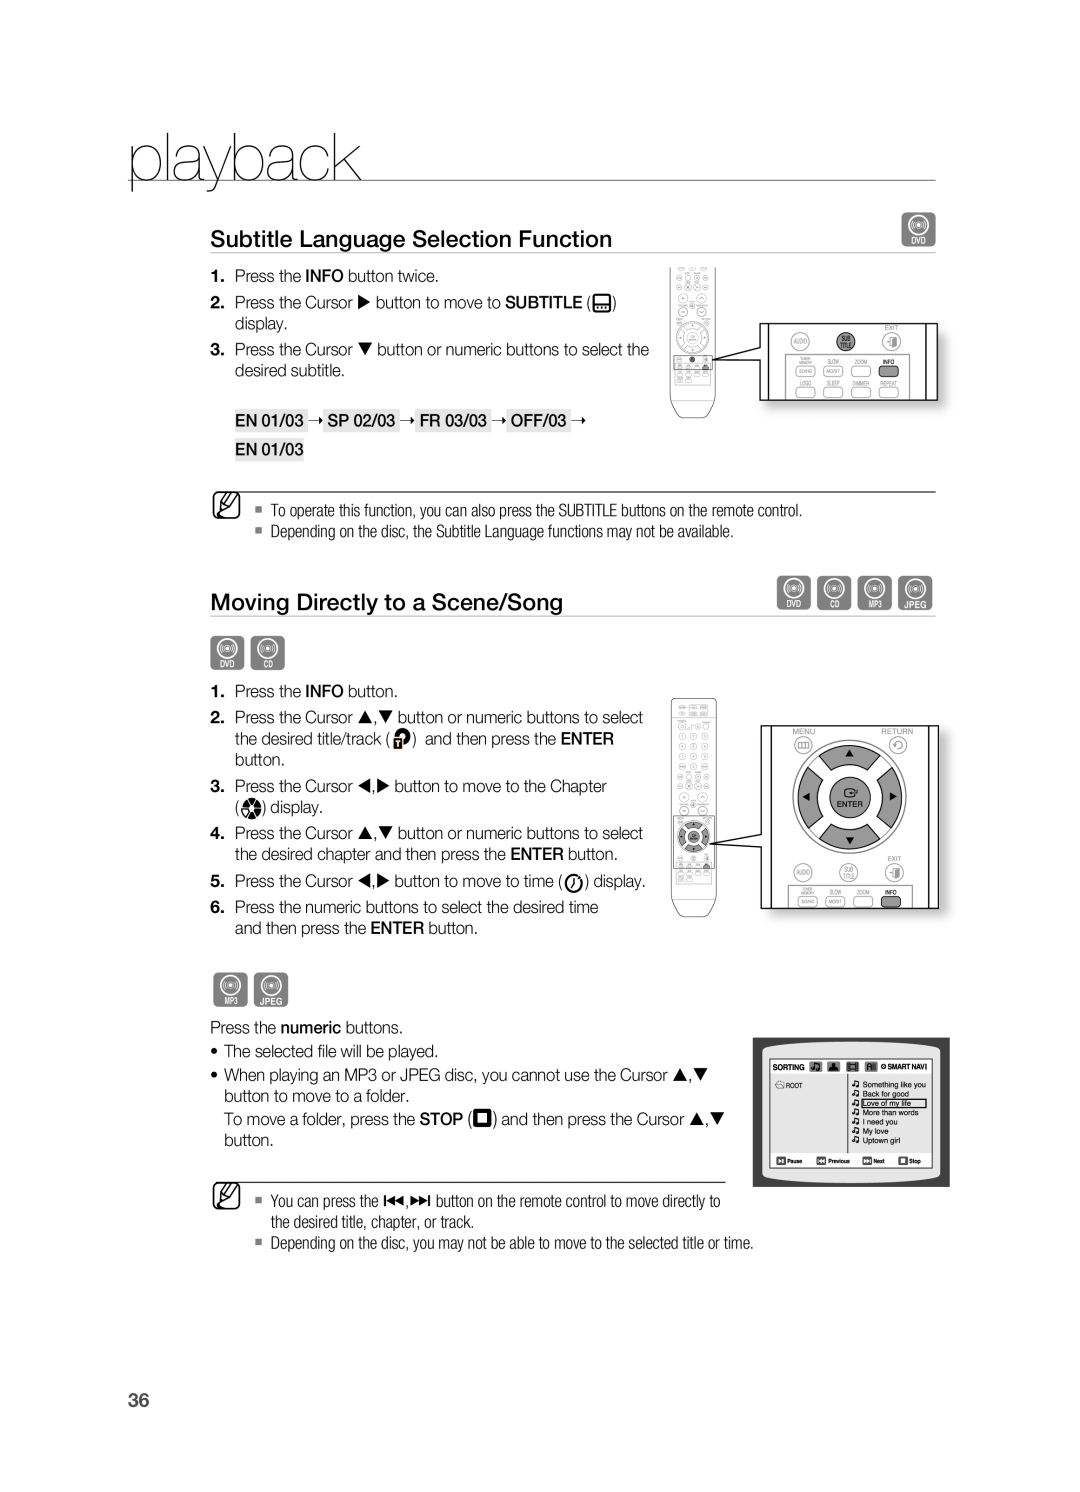 Samsung HT-A100 user manual Subtitle language Selection Function, Moving Directly to a Scene/Song, playback 